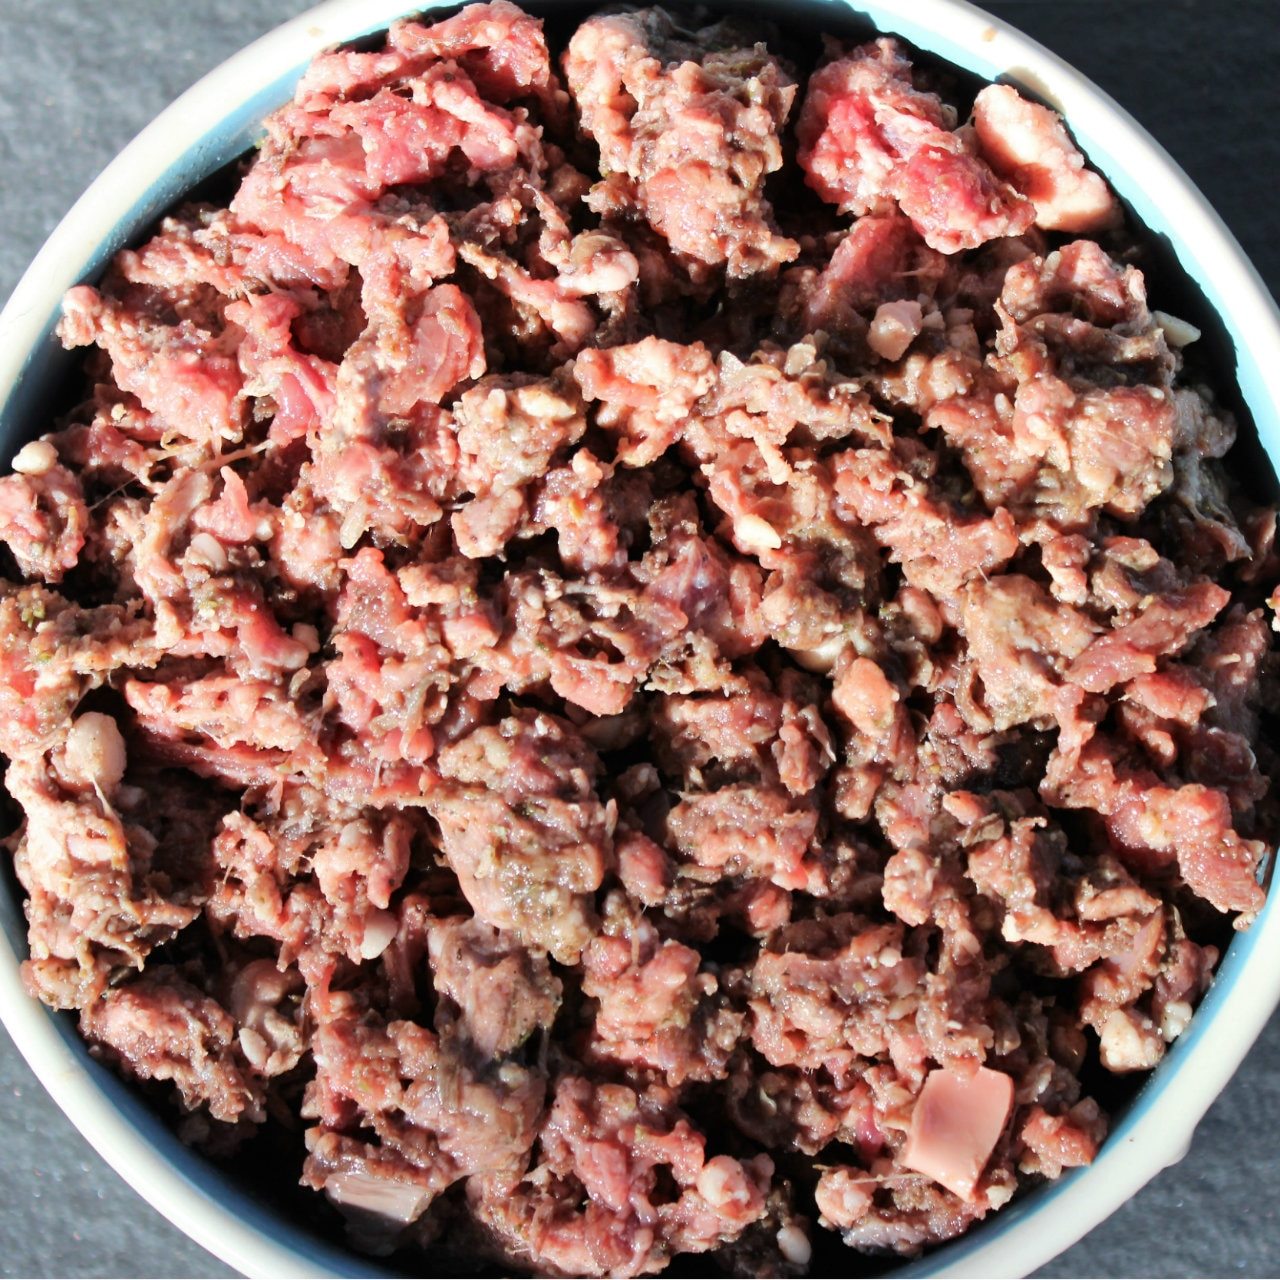 A bowl of Beef Complete Mix raw meat dog food from Raw K9